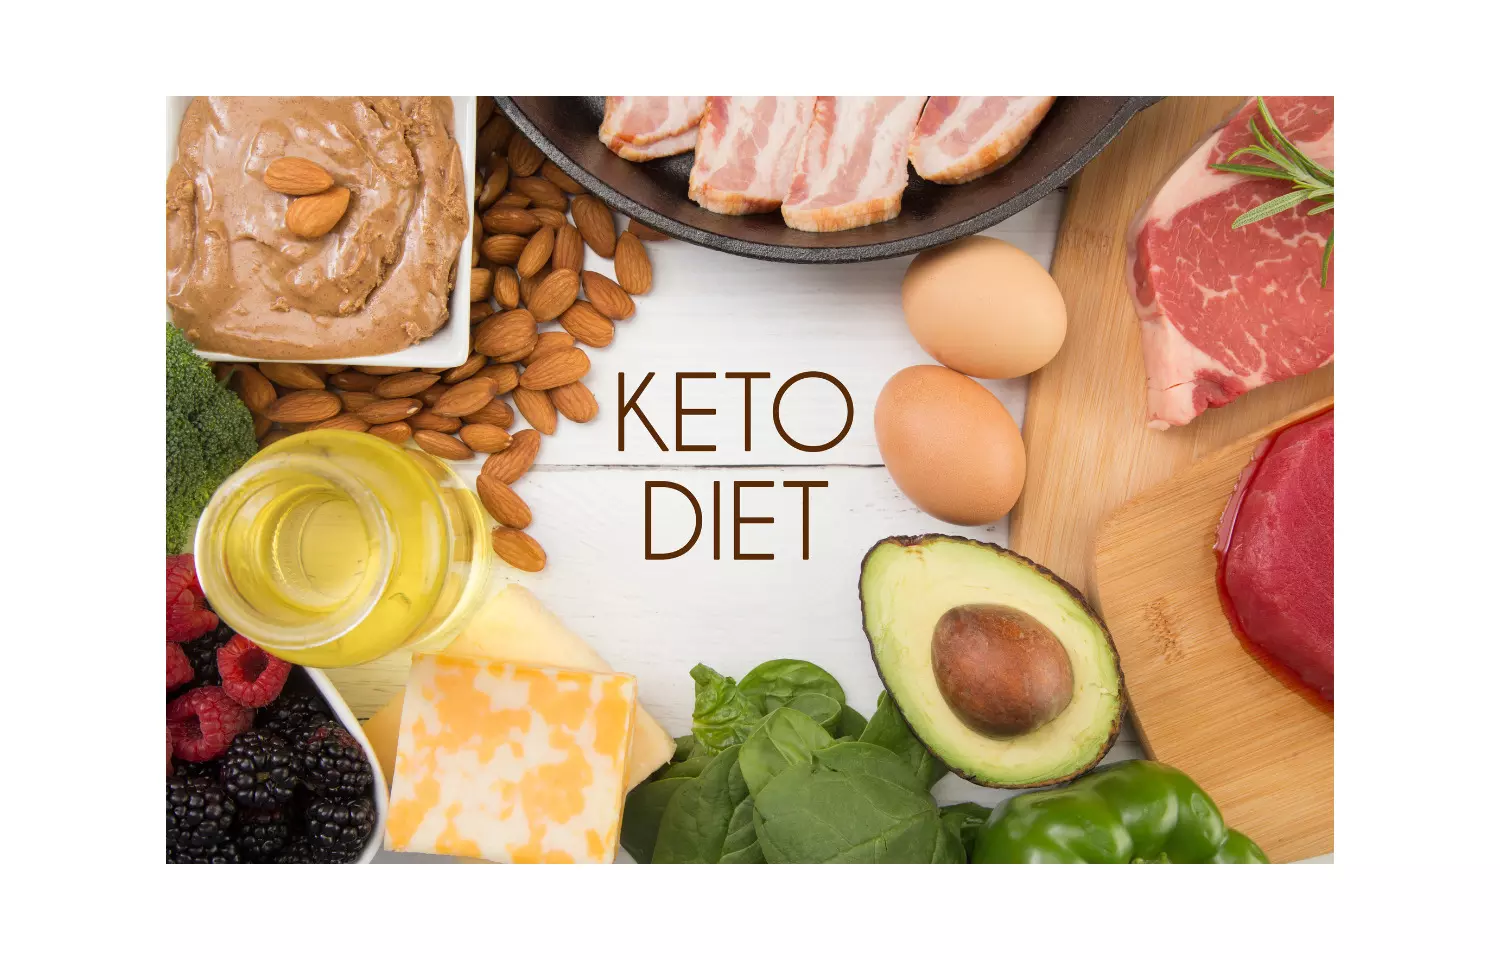 Ketogenic diet helps to lose fat mass in soccer players without affecting performance: Study